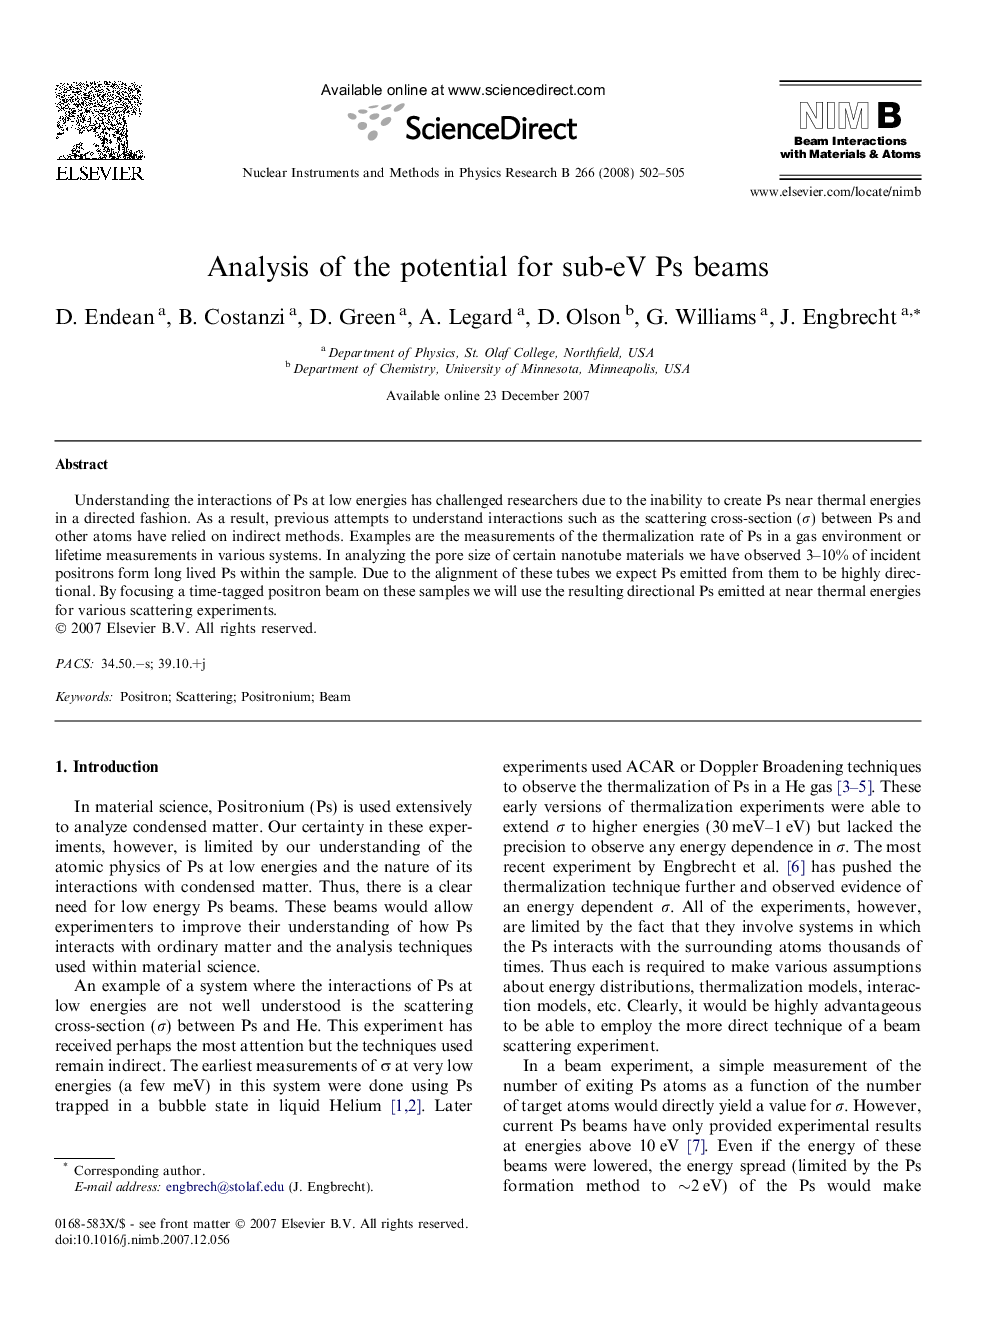 Analysis of the potential for sub-eV Ps beams